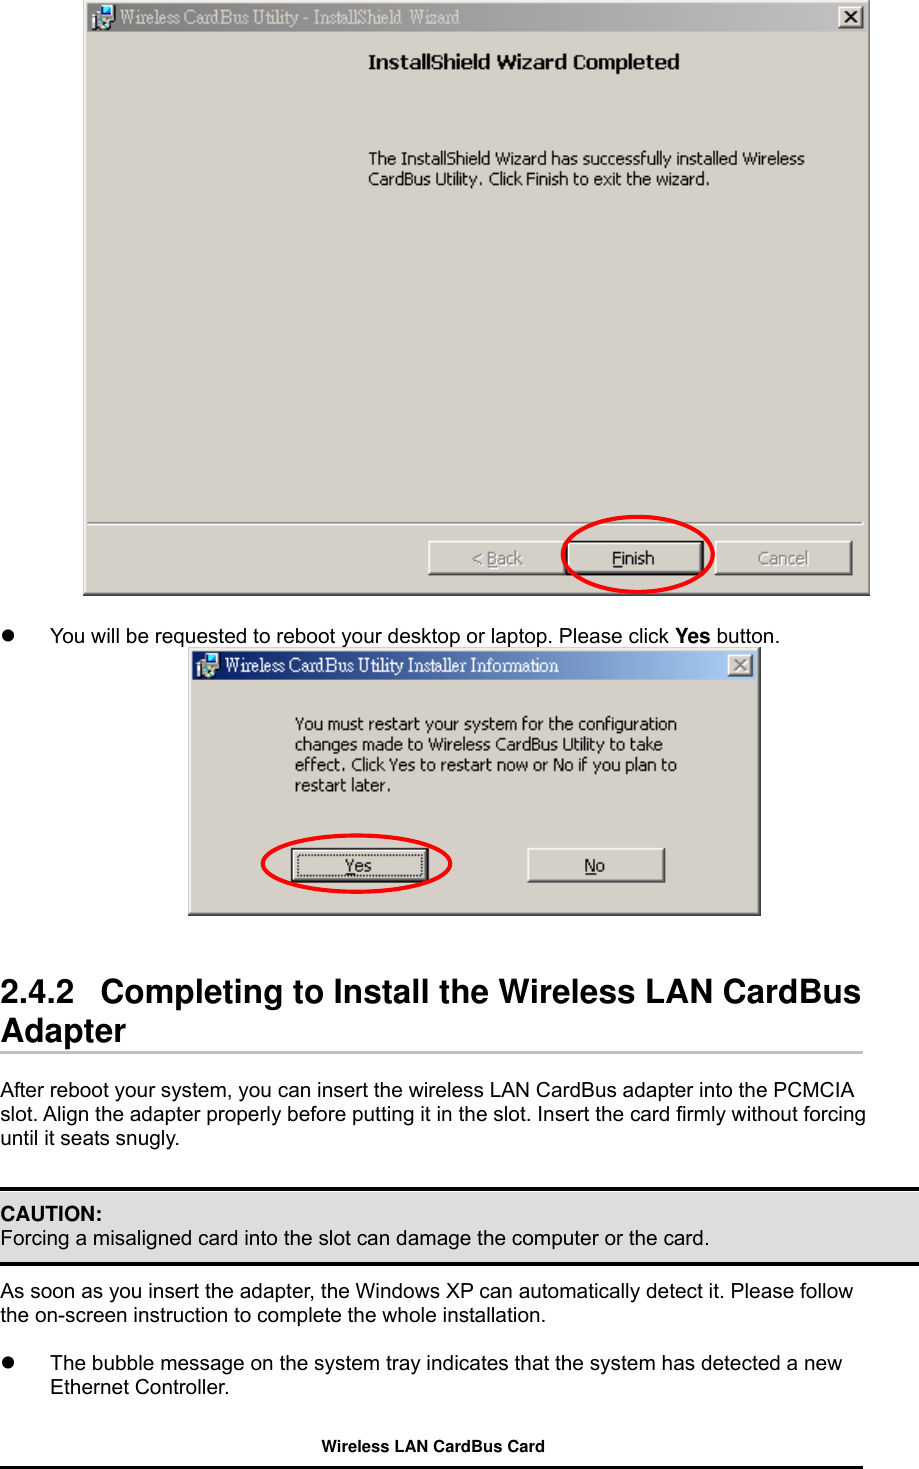     You will be requested to reboot your desktop or laptop. Please click Yes button.     2.4.2   Completing to Install the Wireless LAN CardBus Adapter  After reboot your system, you can insert the wireless LAN CardBus adapter into the PCMCIA slot. Align the adapter properly before putting it in the slot. Insert the card firmly without forcing until it seats snugly.   CAUTION: Forcing a misaligned card into the slot can damage the computer or the card.    As soon as you insert the adapter, the Windows XP can automatically detect it. Please follow the on-screen instruction to complete the whole installation.    The bubble message on the system tray indicates that the system has detected a new Ethernet Controller. Wireless LAN CardBus Card 